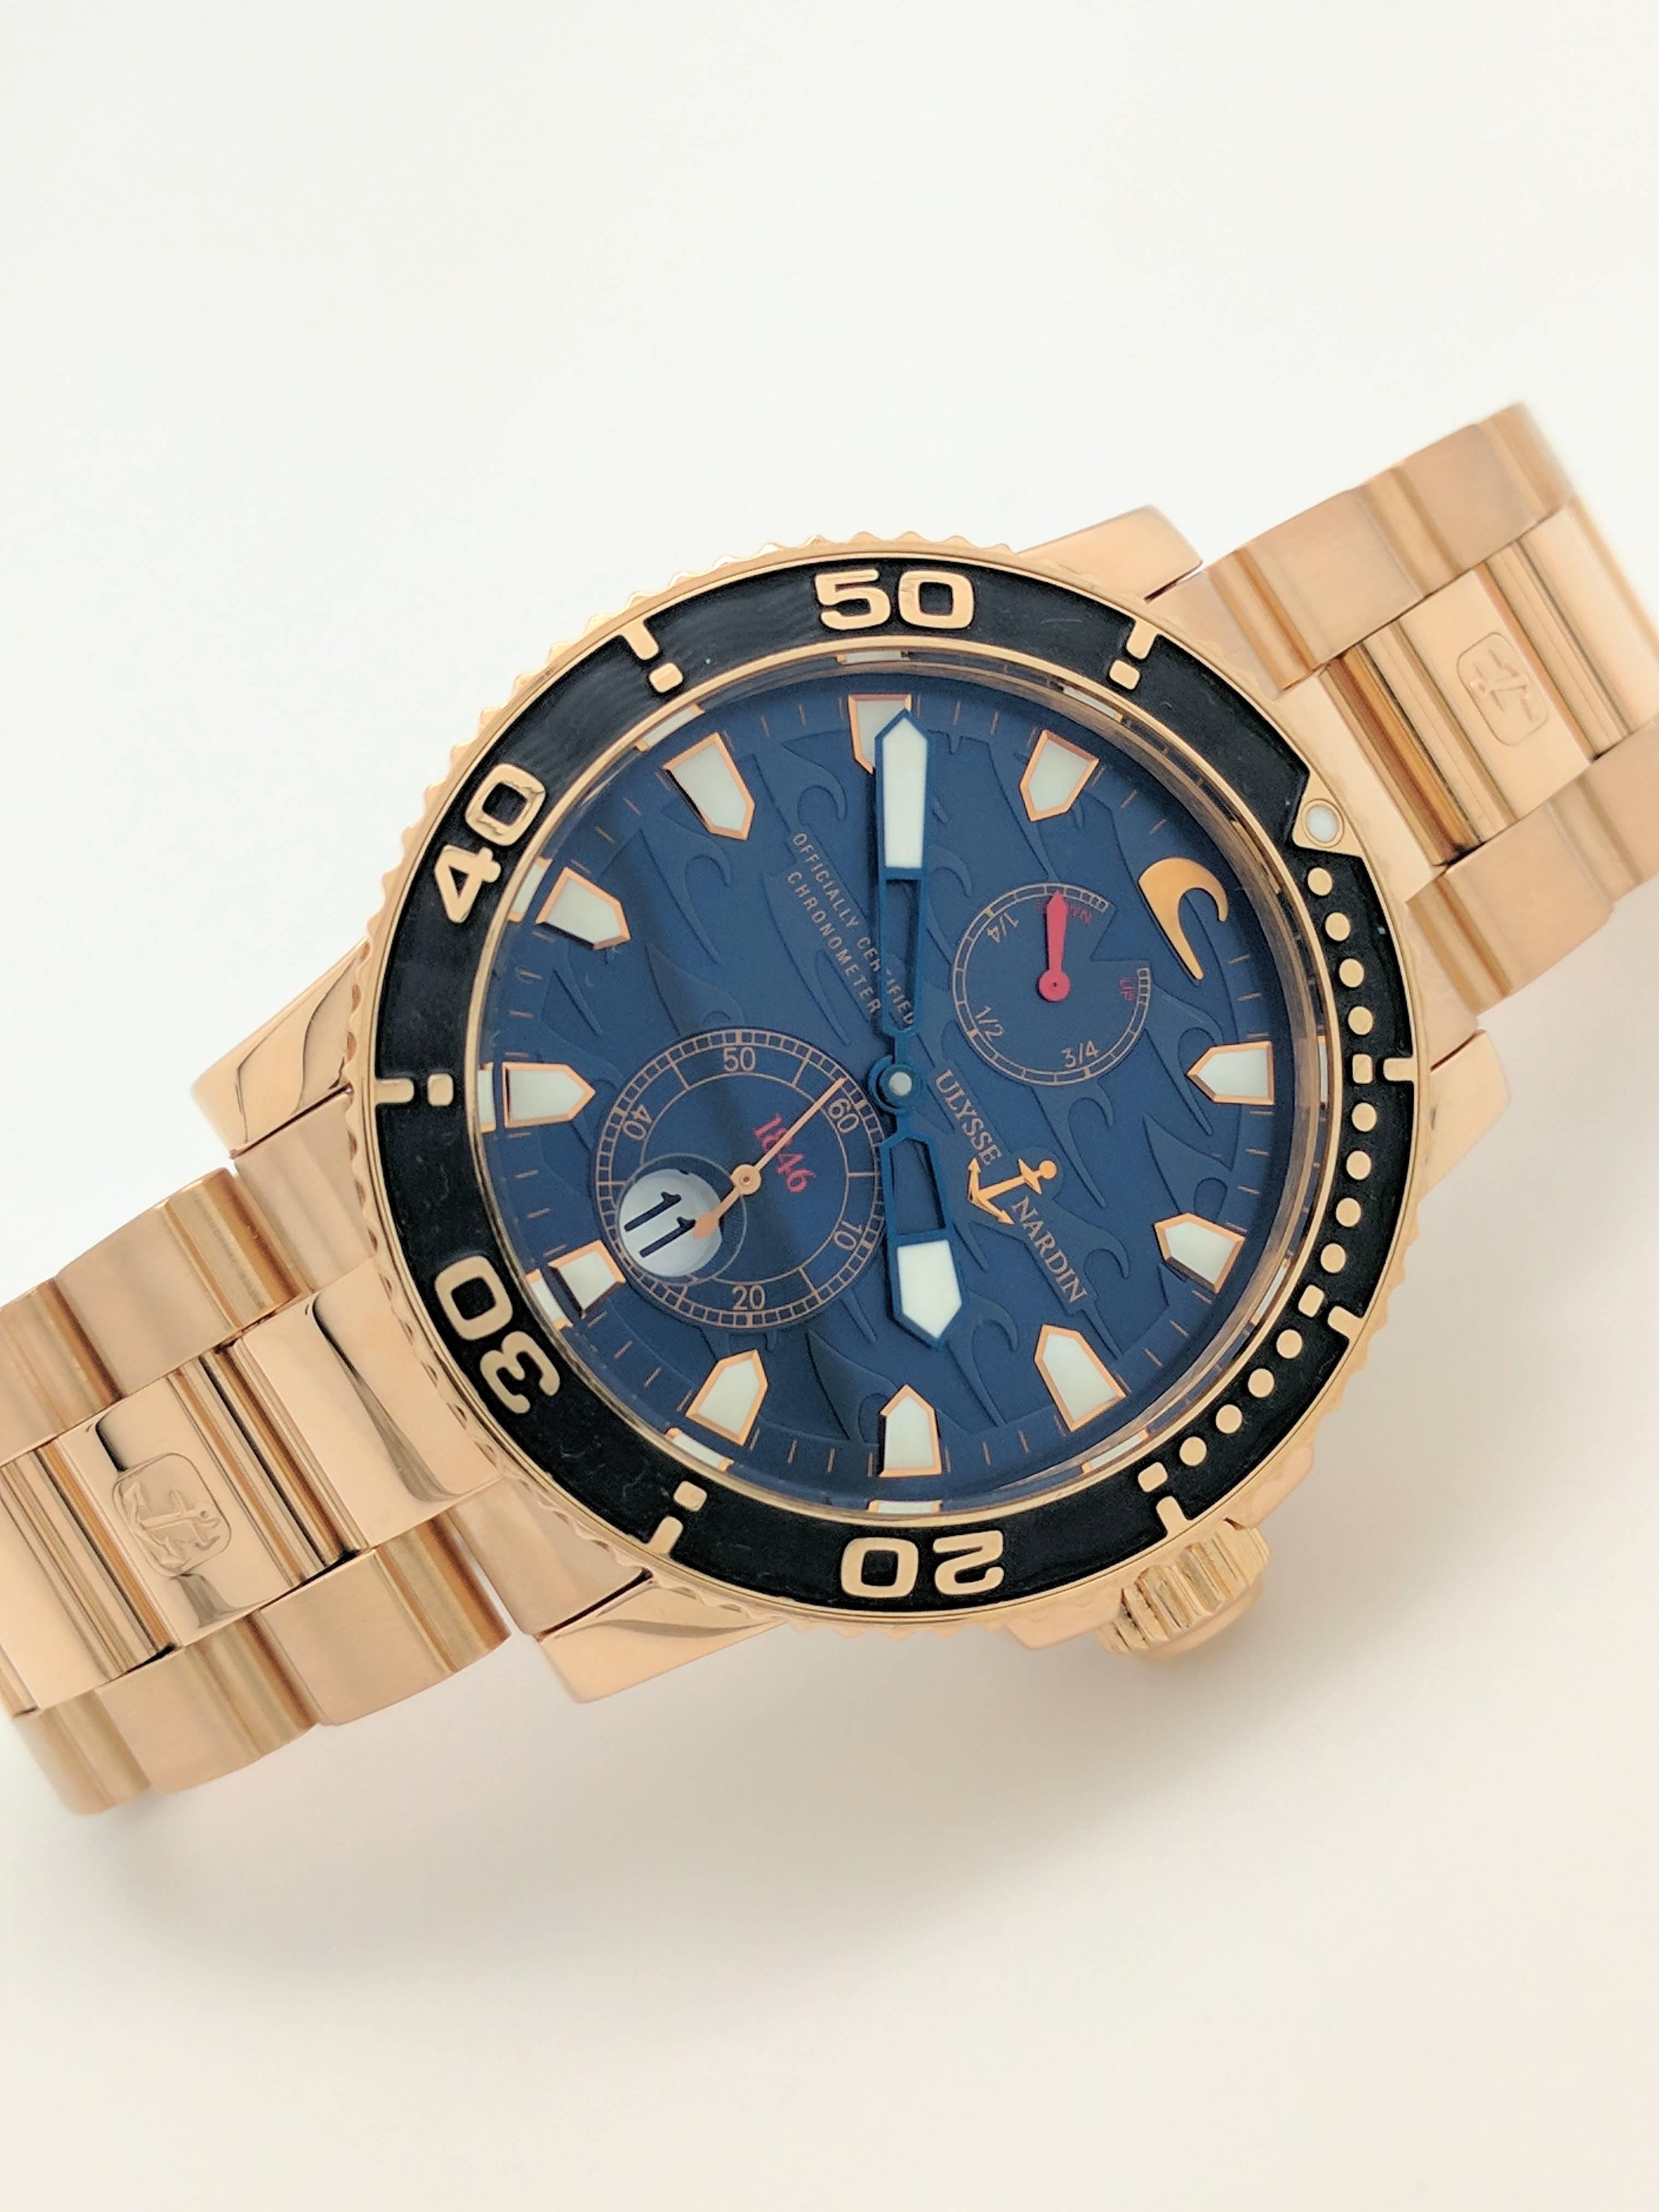 You are viewing an Authentic and all Original Ulysse Nardin Maxi Marine Blue Surf 18k Rose Gold Men's Diver Watch. Model: 266-36. This watch is a limited edition piece in rose gold and is #223 of 500. Original retail price is $44,000.

The following